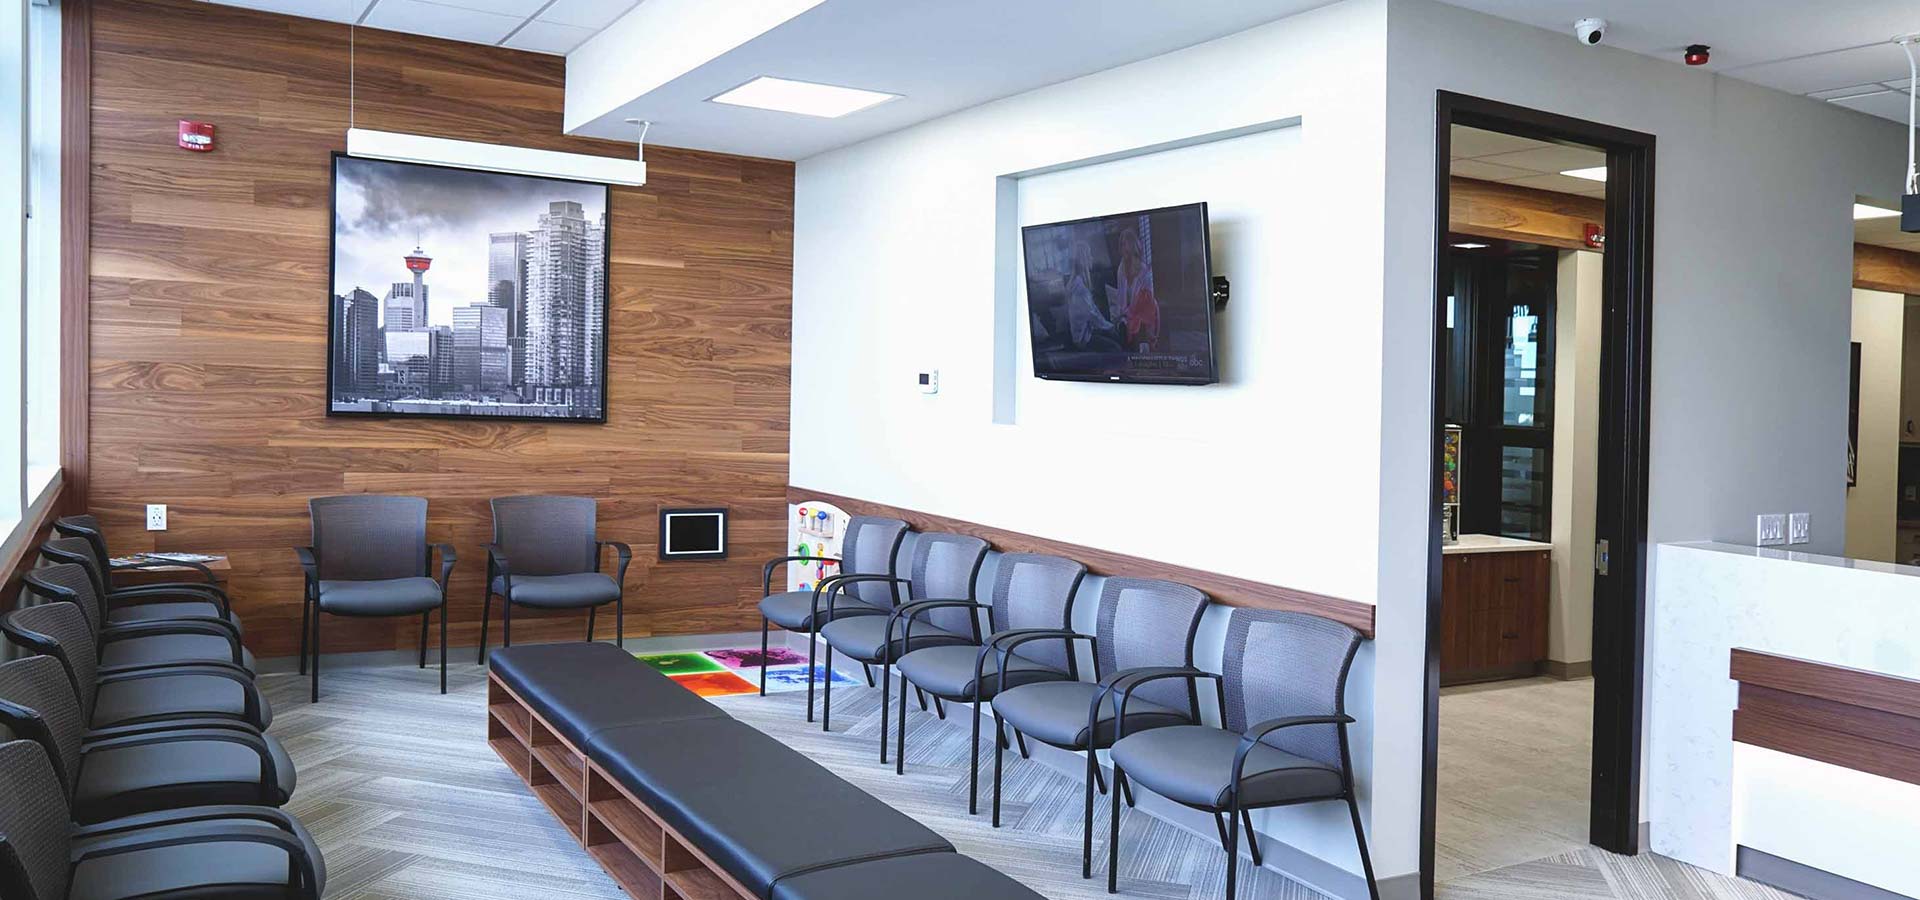 Welcoming Reception Area | South Calgary Dental & Orthodontics | General and Family Dentist and Orthodontist | SE Calgary